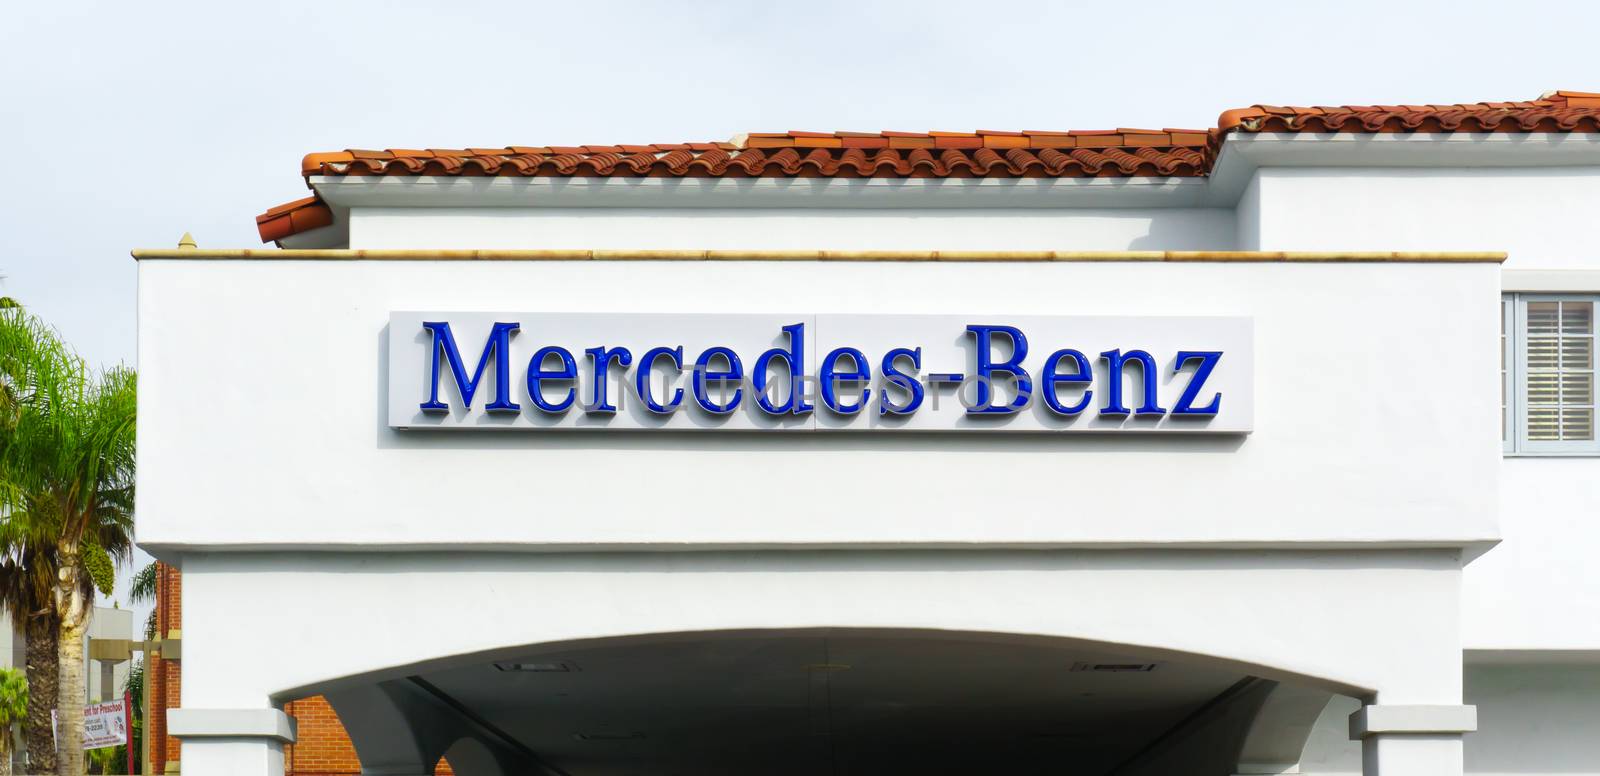 Mercedes-Benz Automobile Dealership Sign by wolterk